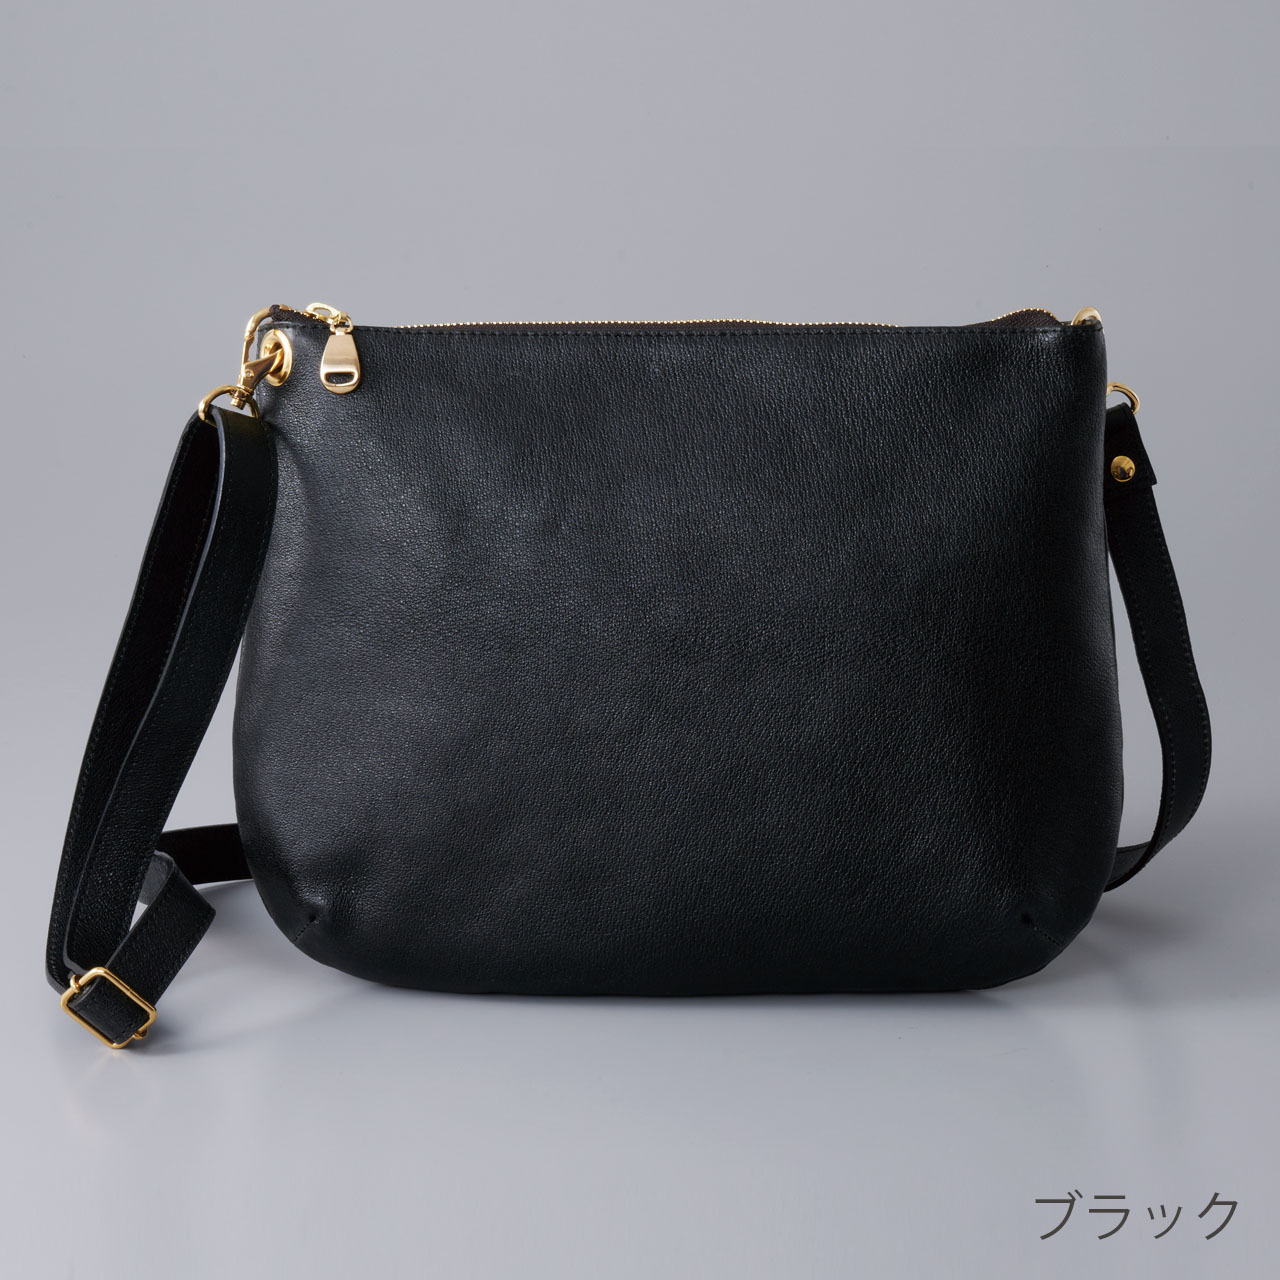 AW.Leather ポシェット エコデパジャパン